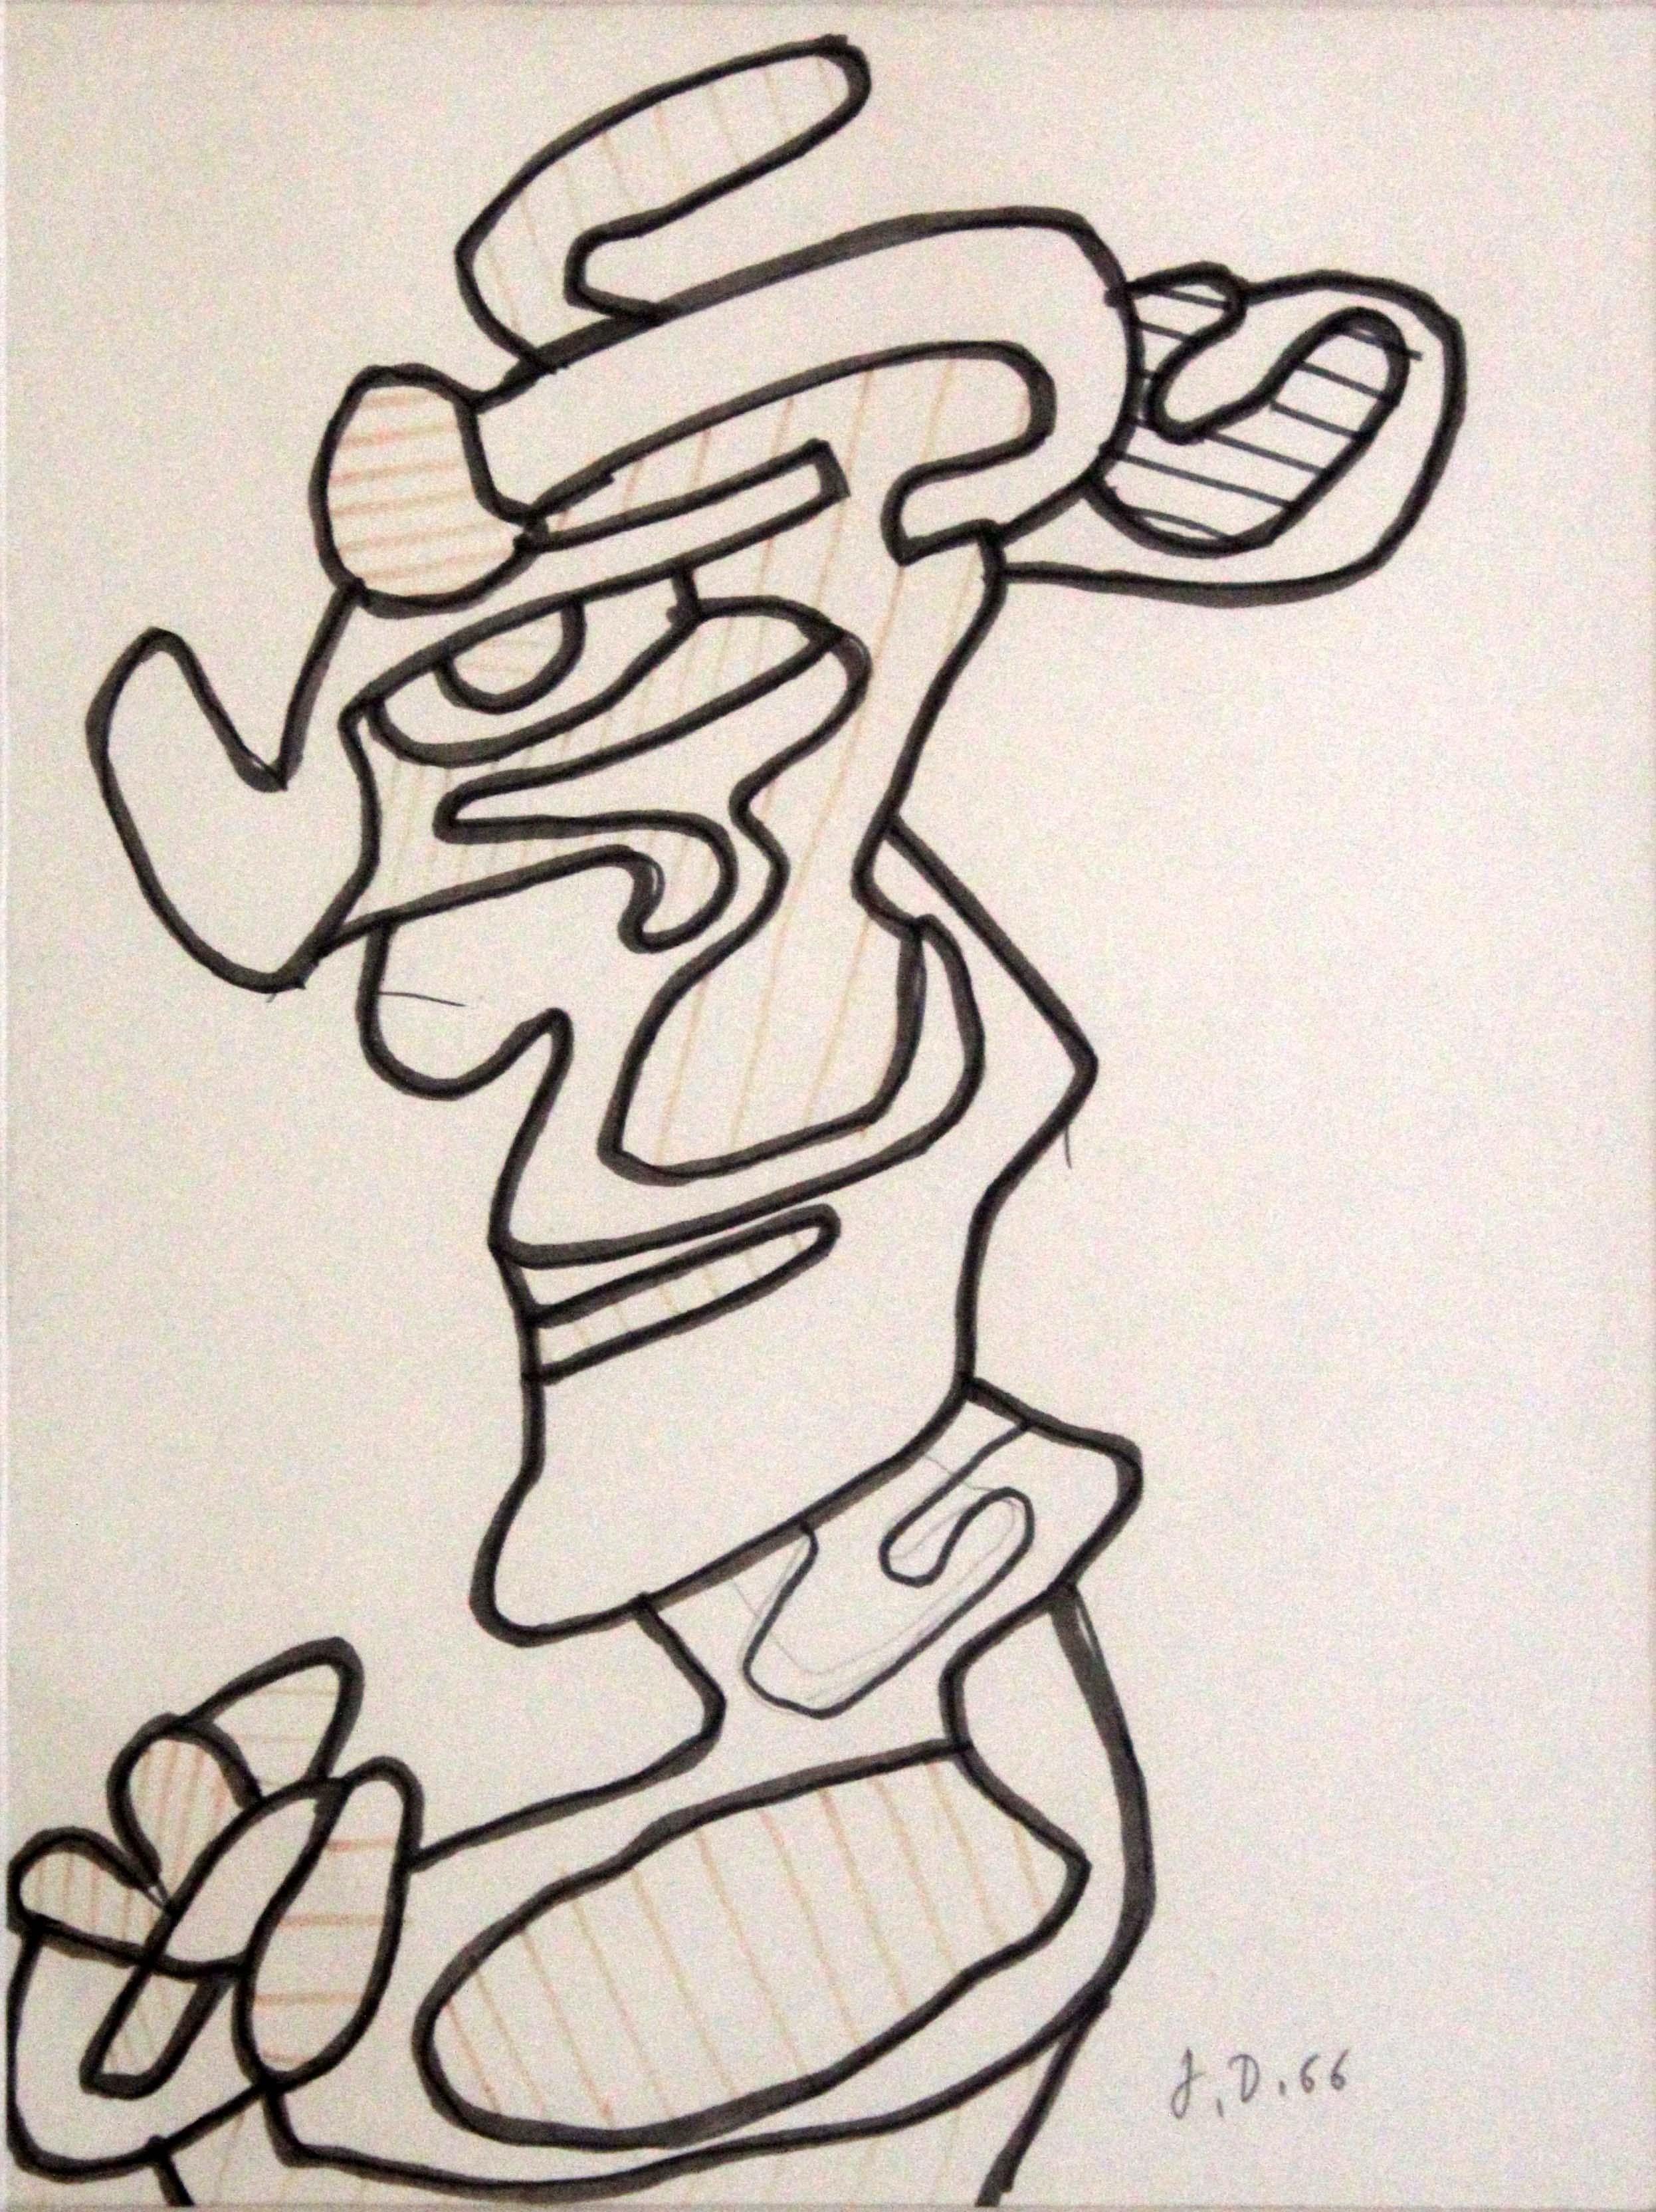 A rare graphic and expressive felt pen drawing on paper titled Tete I (Head I) by French artist Jean Dubuffet. Signed on the bottom right with a ‘66 date. On the verso is the original gallery tag from Donald Morris Gallery Inc. Detroit, Michigan.